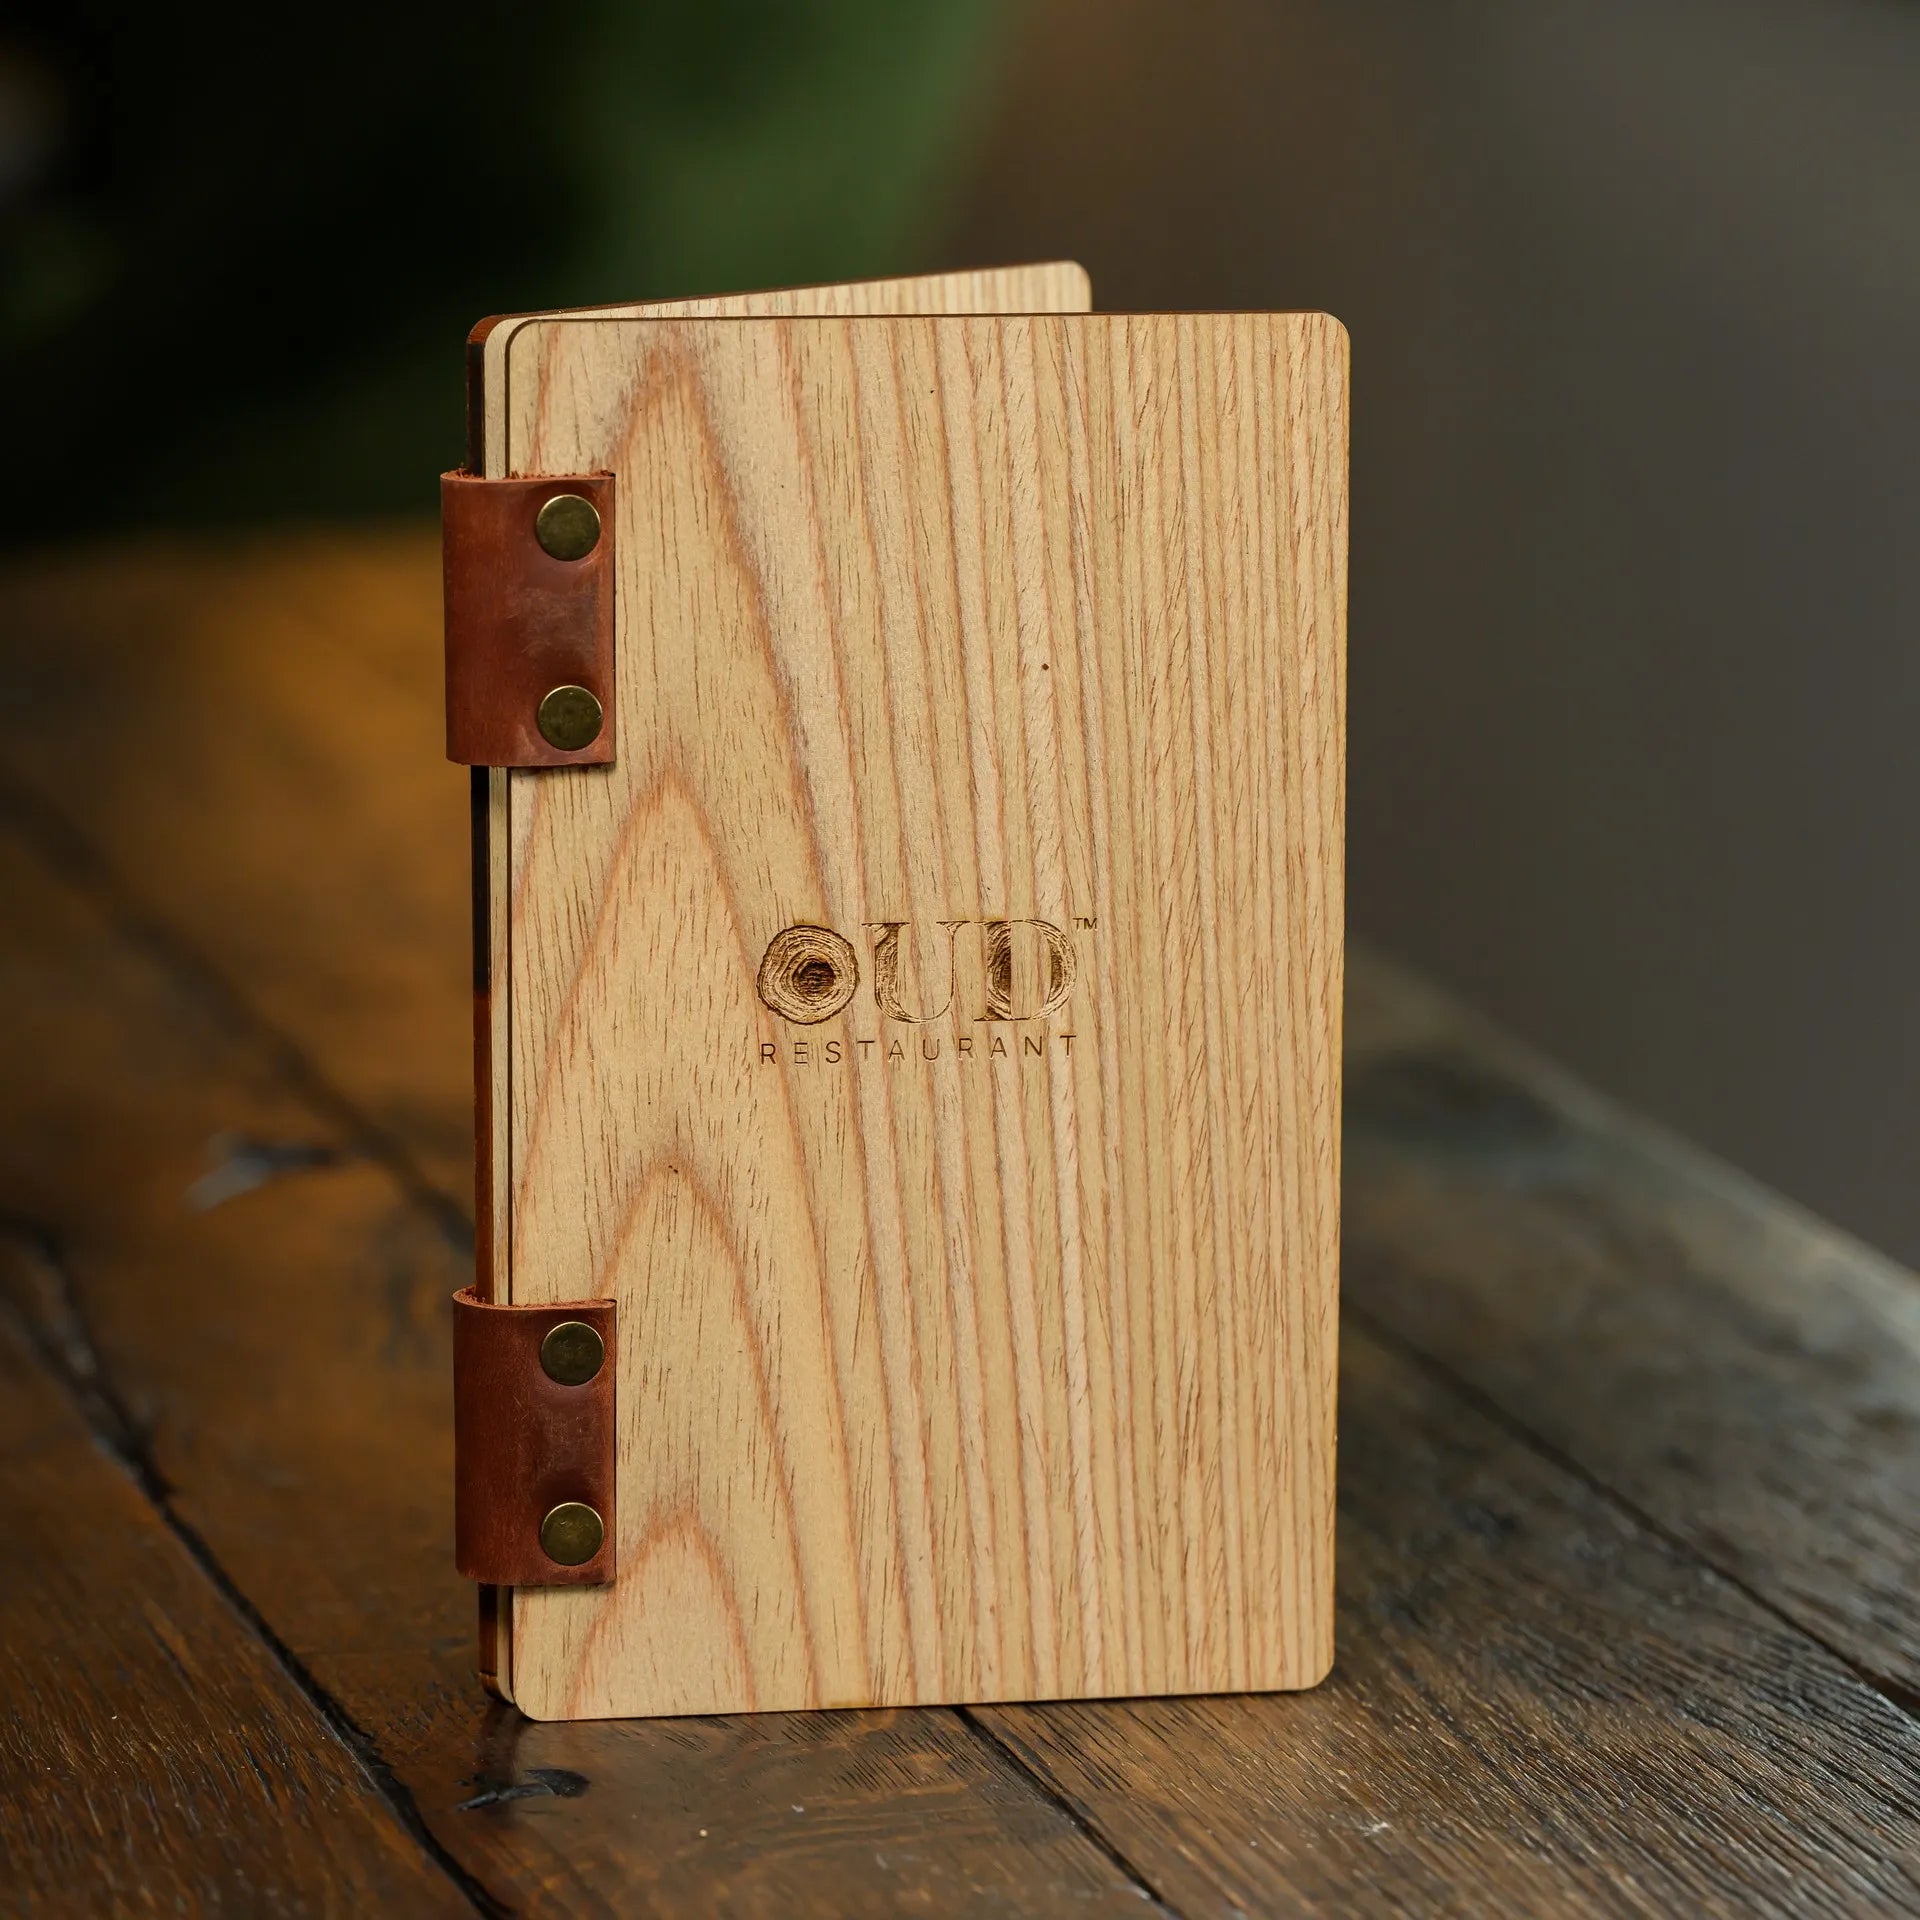 Elegant Veneered HDF Bill Presenter for restaurants. Features logo engraving and a durable build for professional meal invoice presentation.